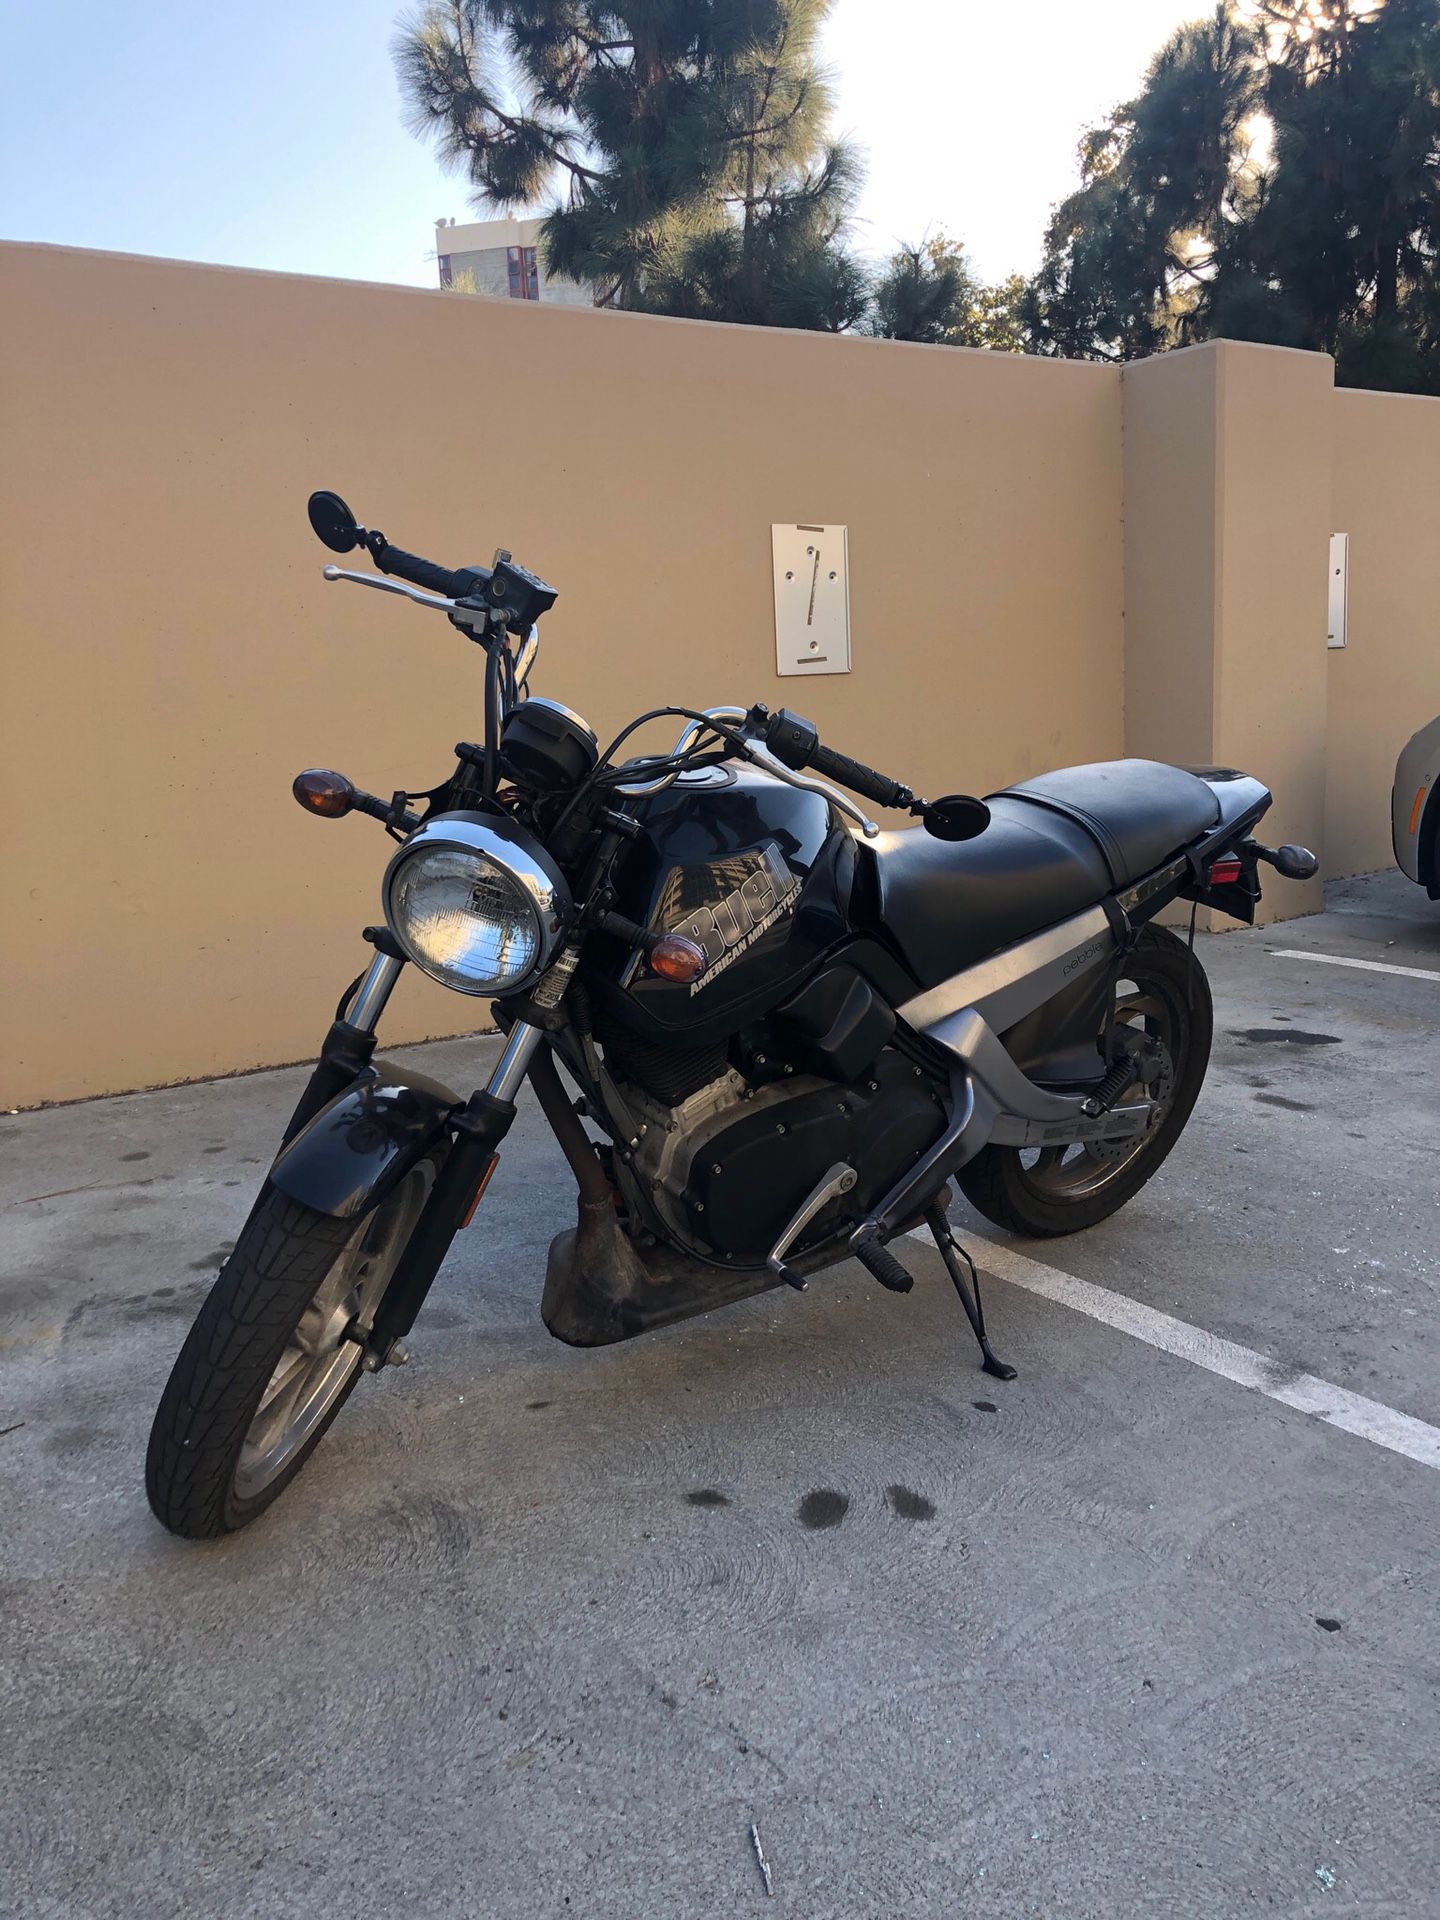 2006 Buell Blast - An awesome, inexpensive bike for beginners & city riders!